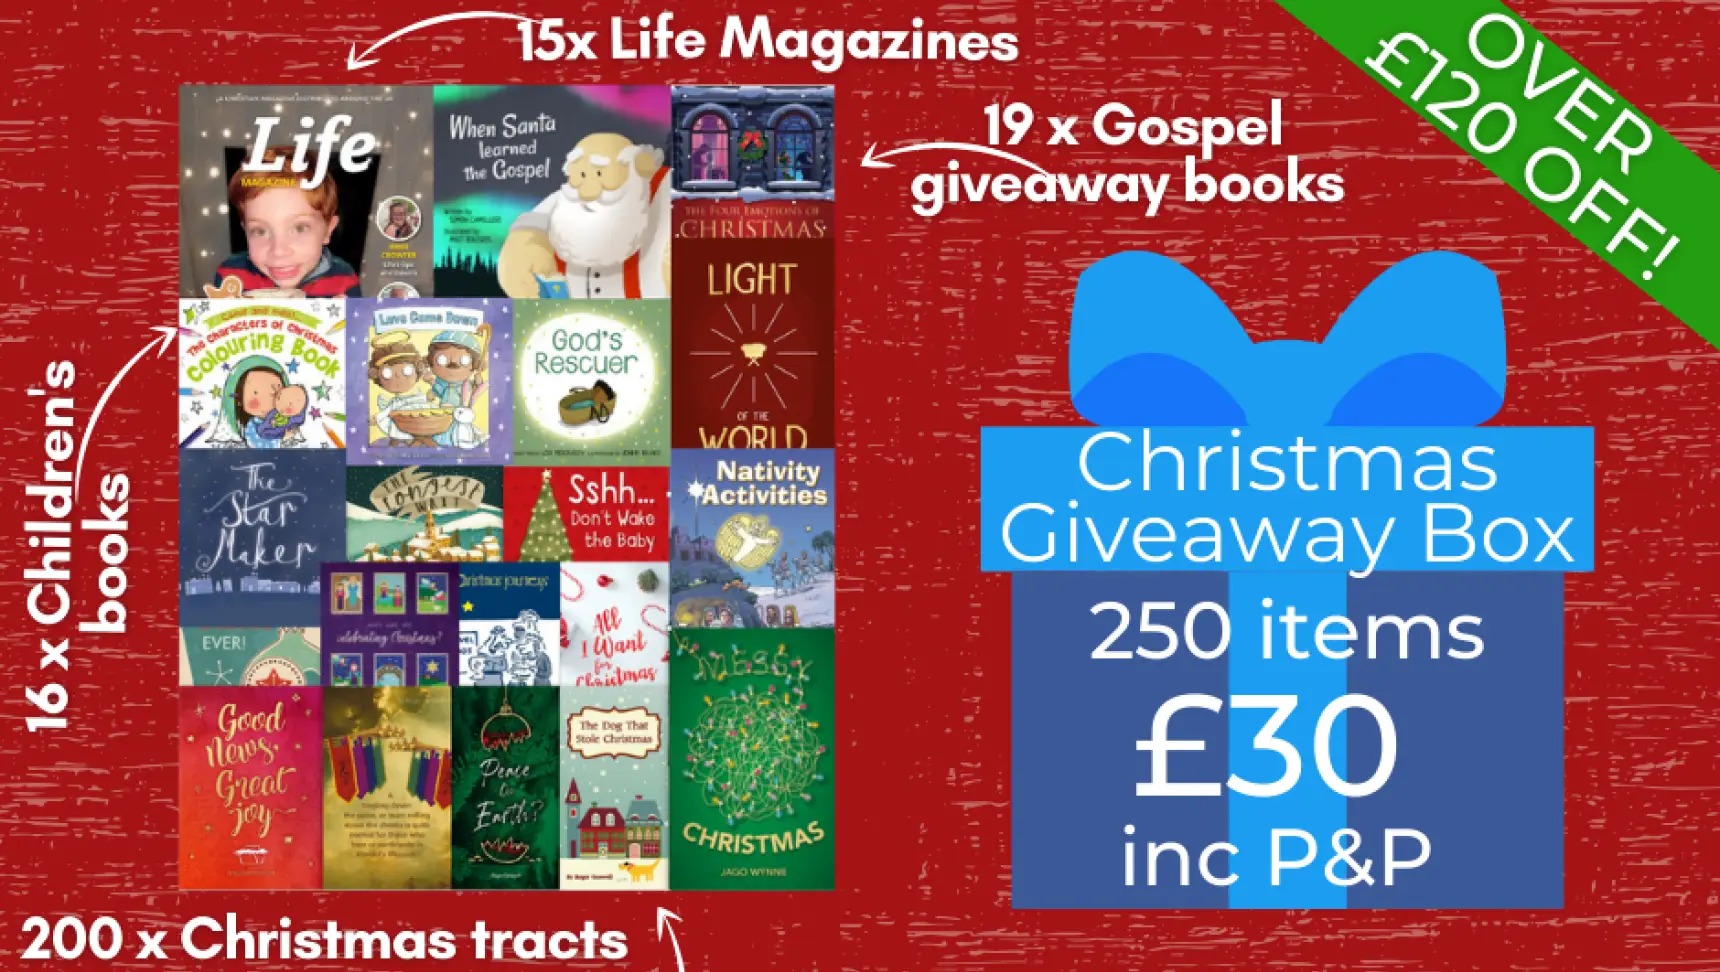 point-to-jesus-this-christmas-giveaway-box.png